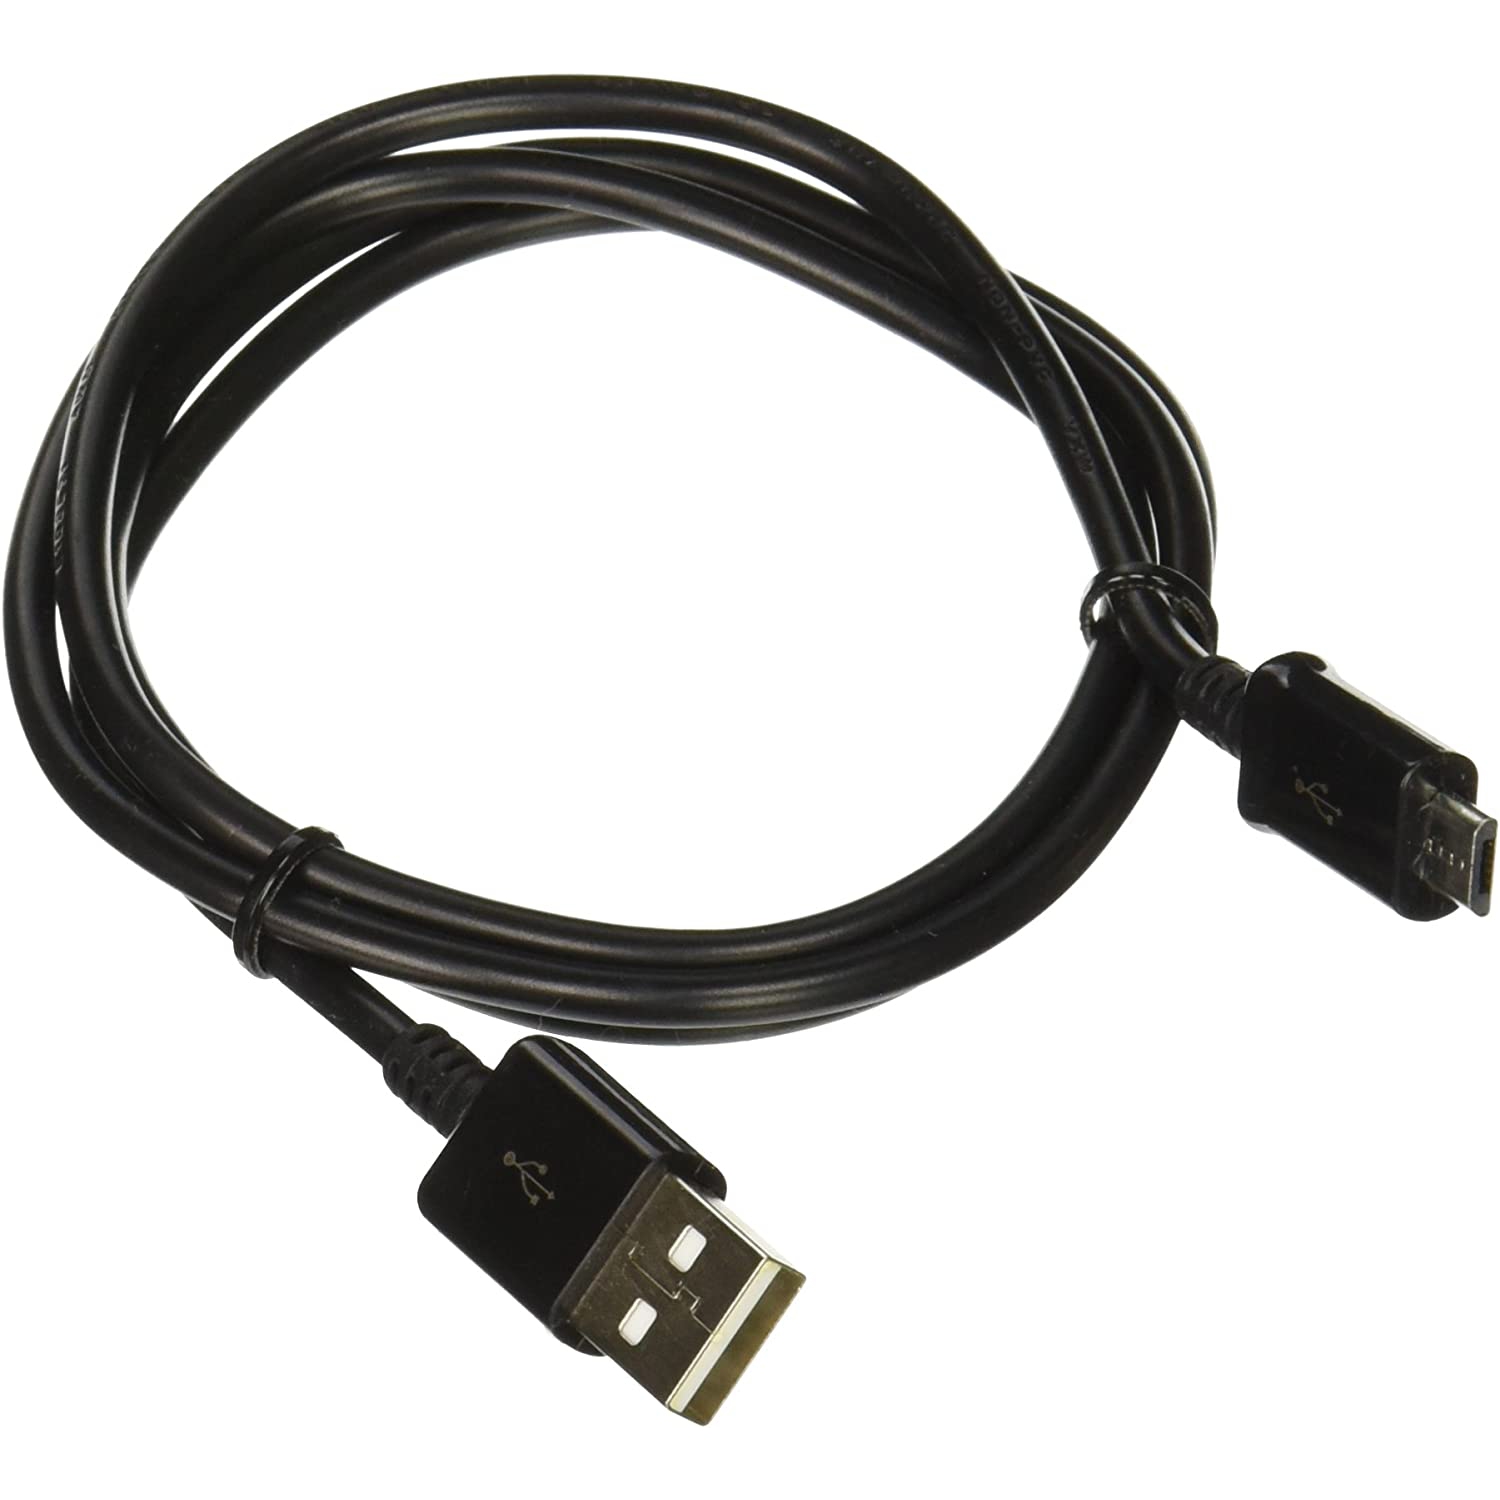 Sync and Charge USB Cable for Huawei Ascend - Non-Retail Packaging - Black